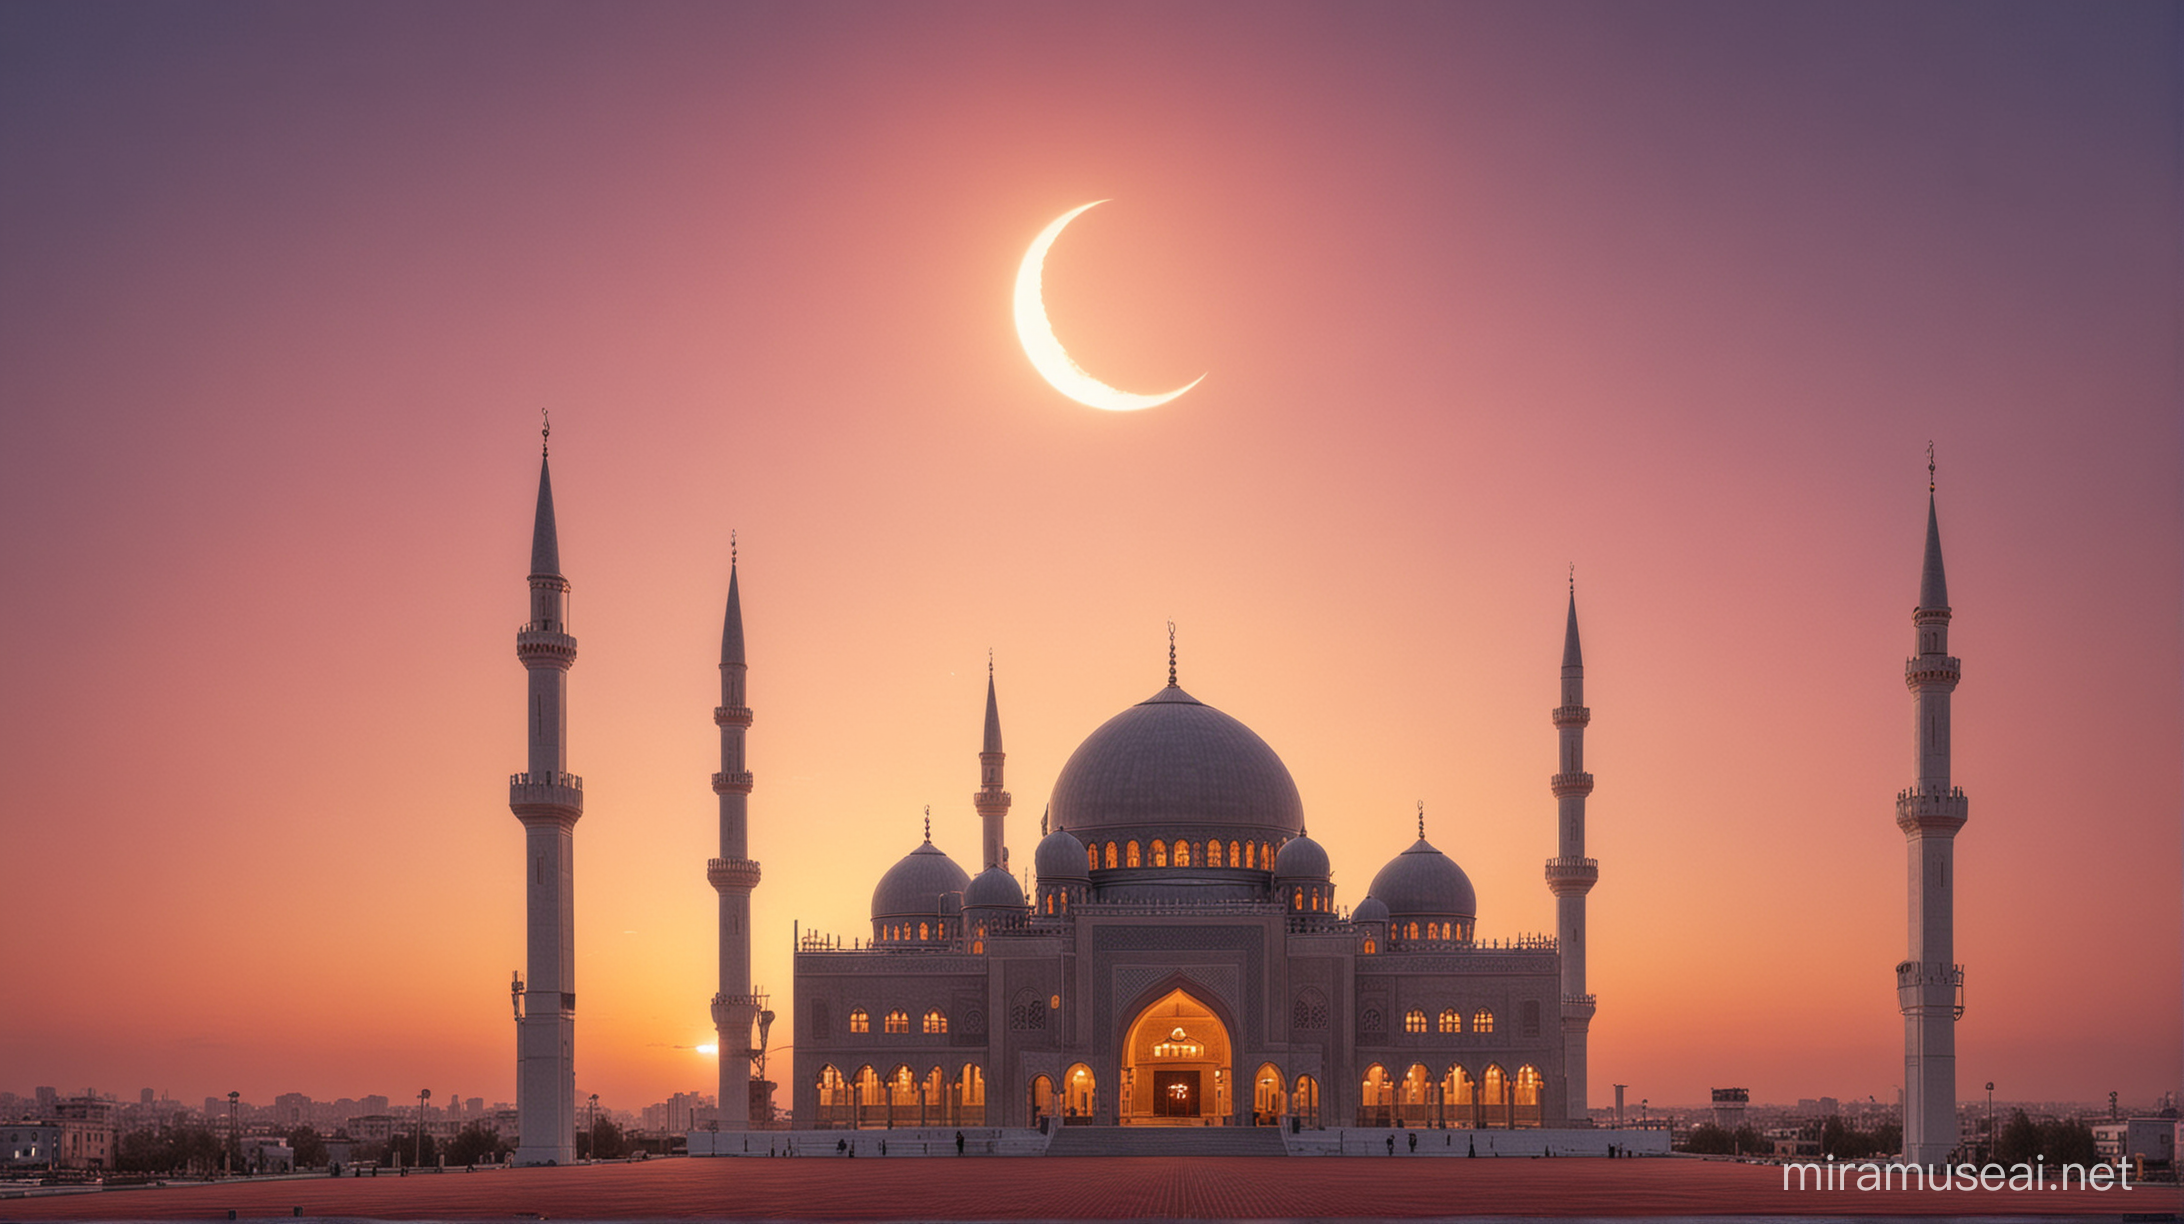 Isolated Mosque against Beautiful Warm Sky with Crescent